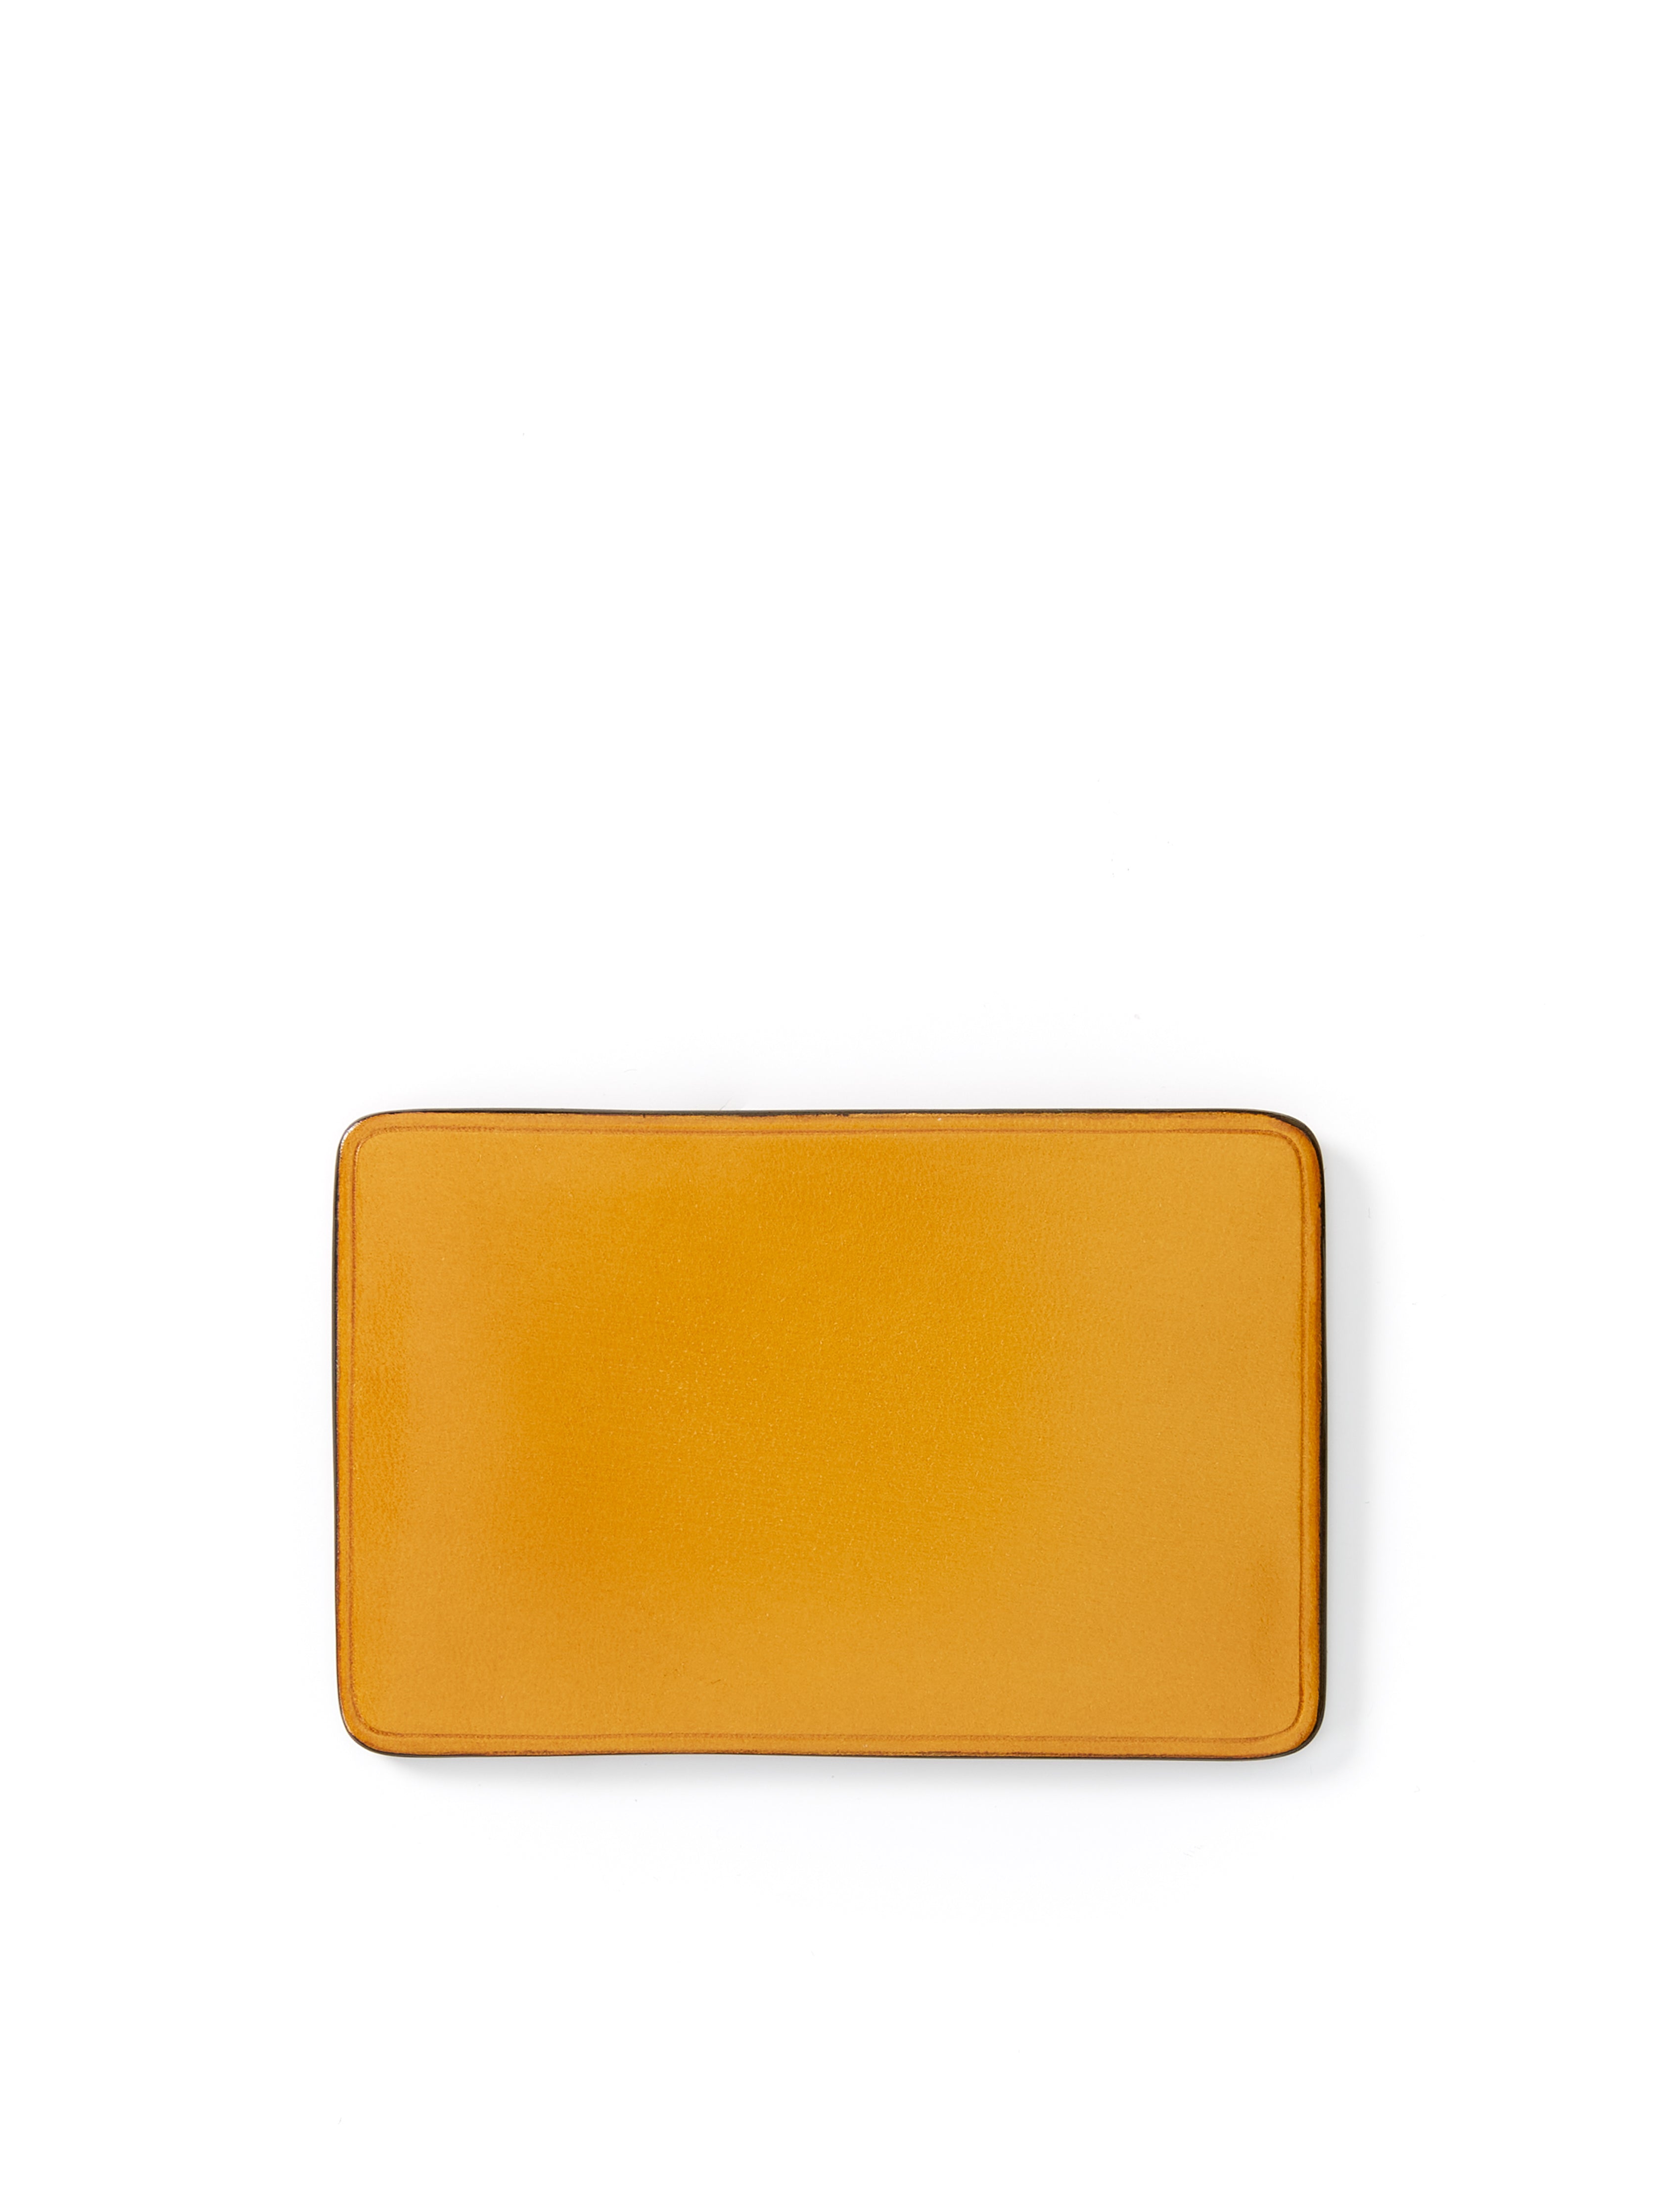 Il Bussetto Card Holder Tan Leather